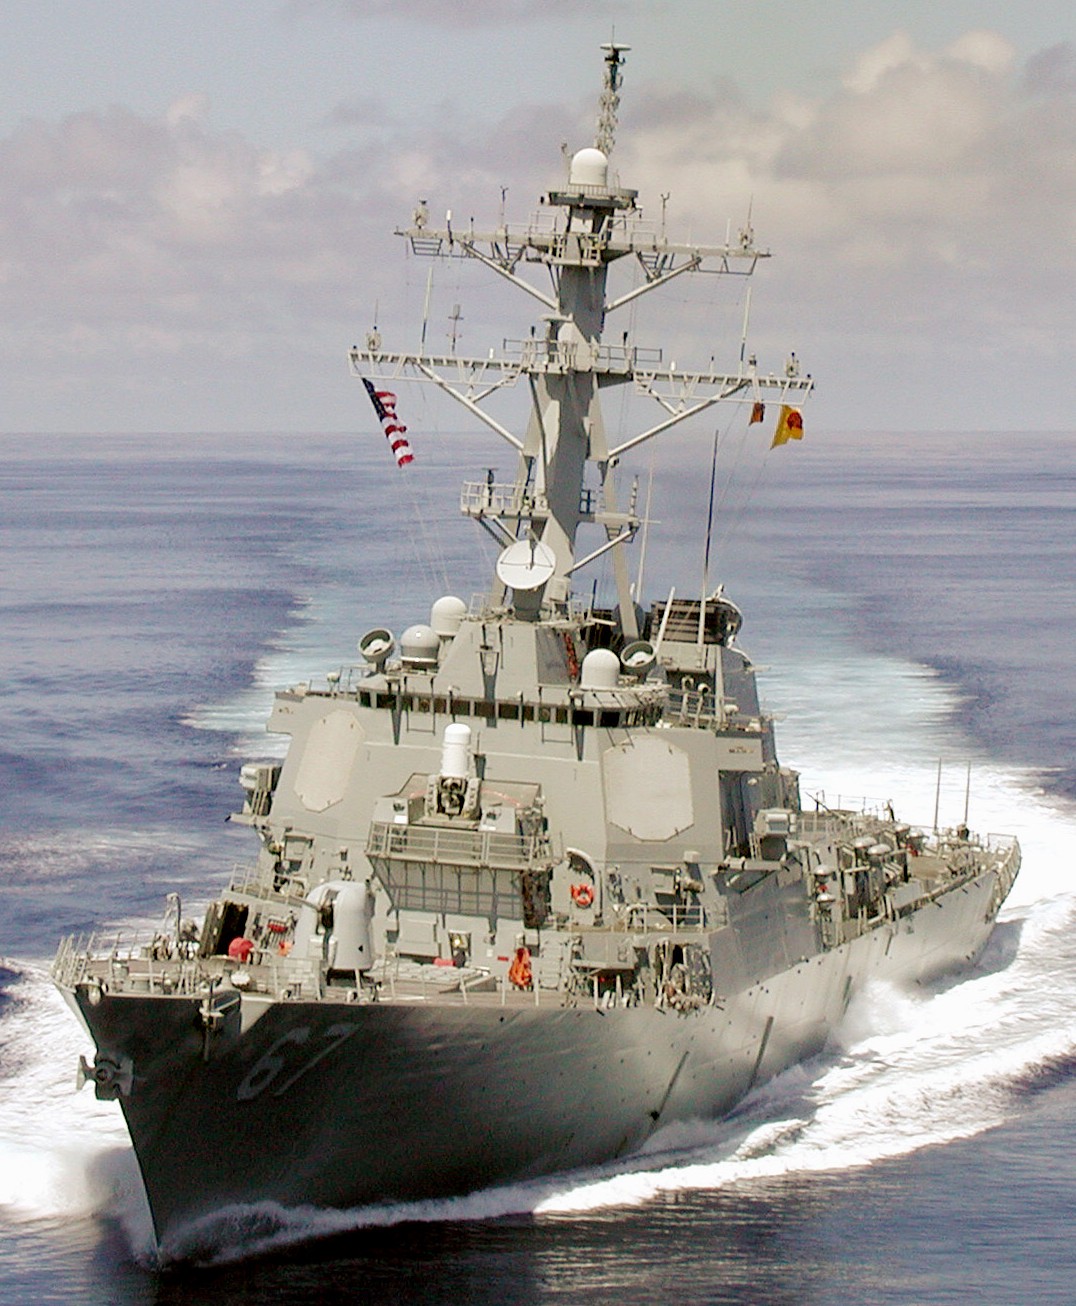 ddg-67 uss cole guided missile destroyer arleigh burke class navy aegis 53